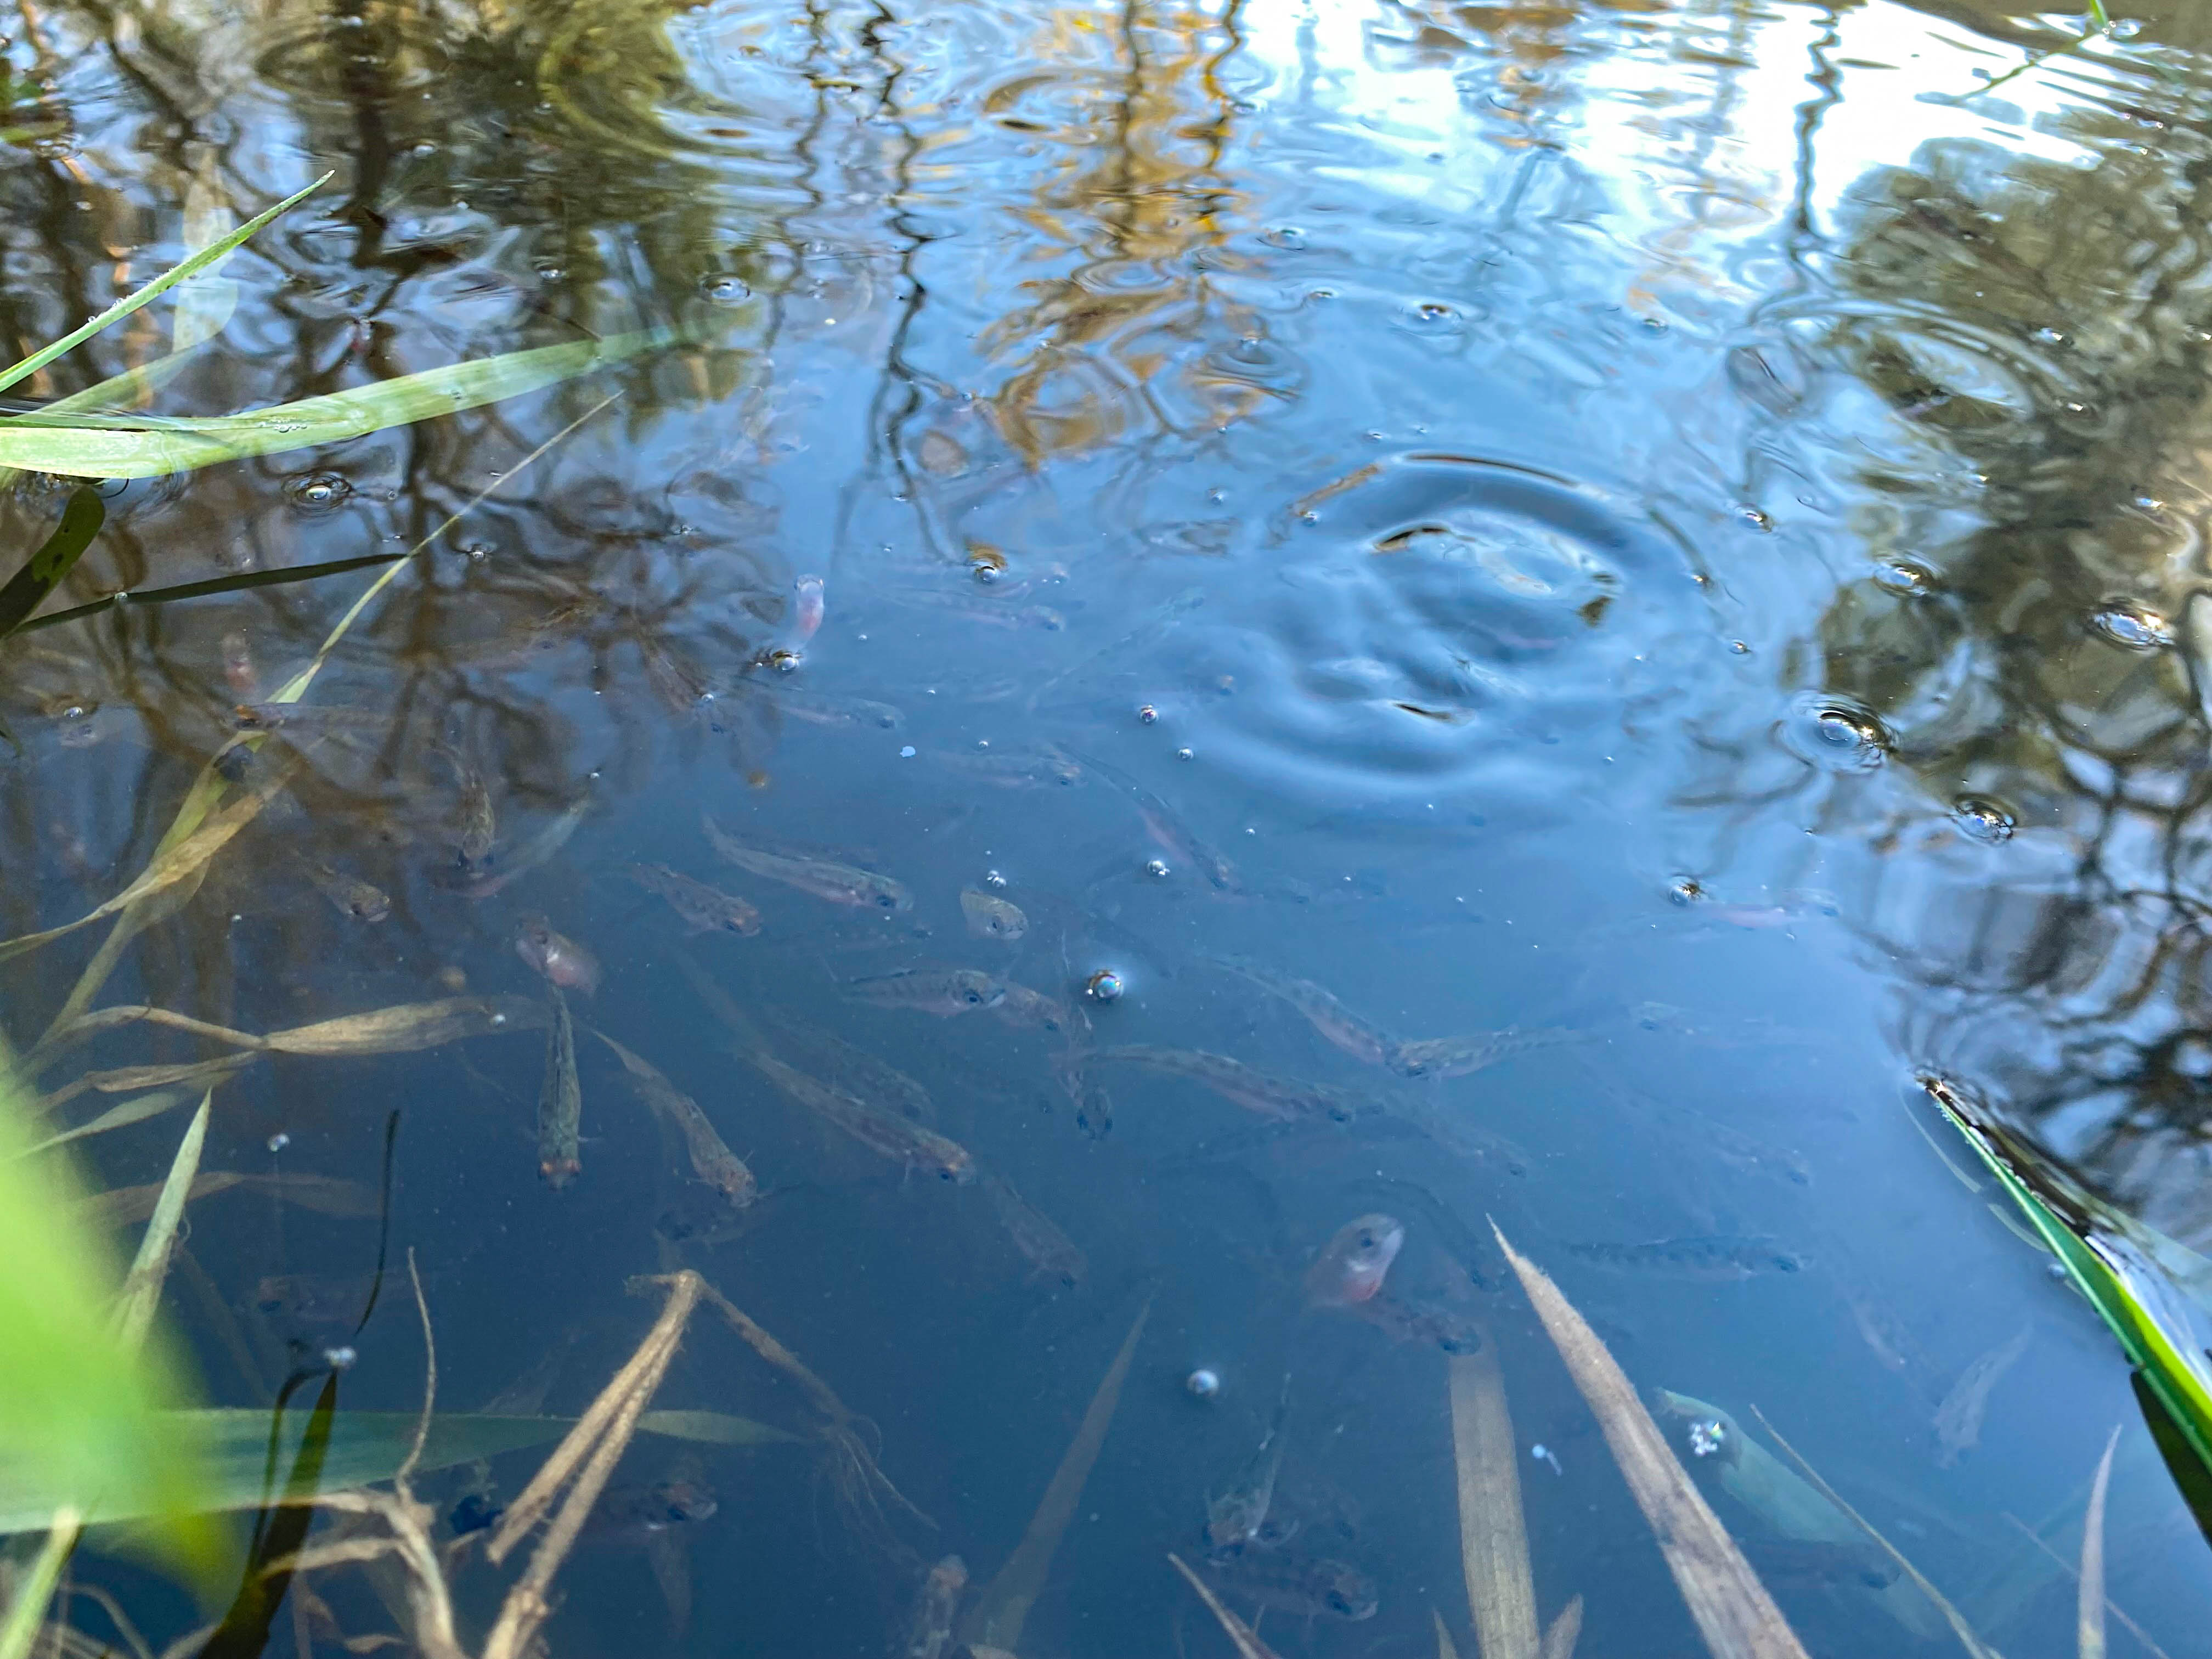 Juvenile fish in water with ripples and current and vegetation surrounding.